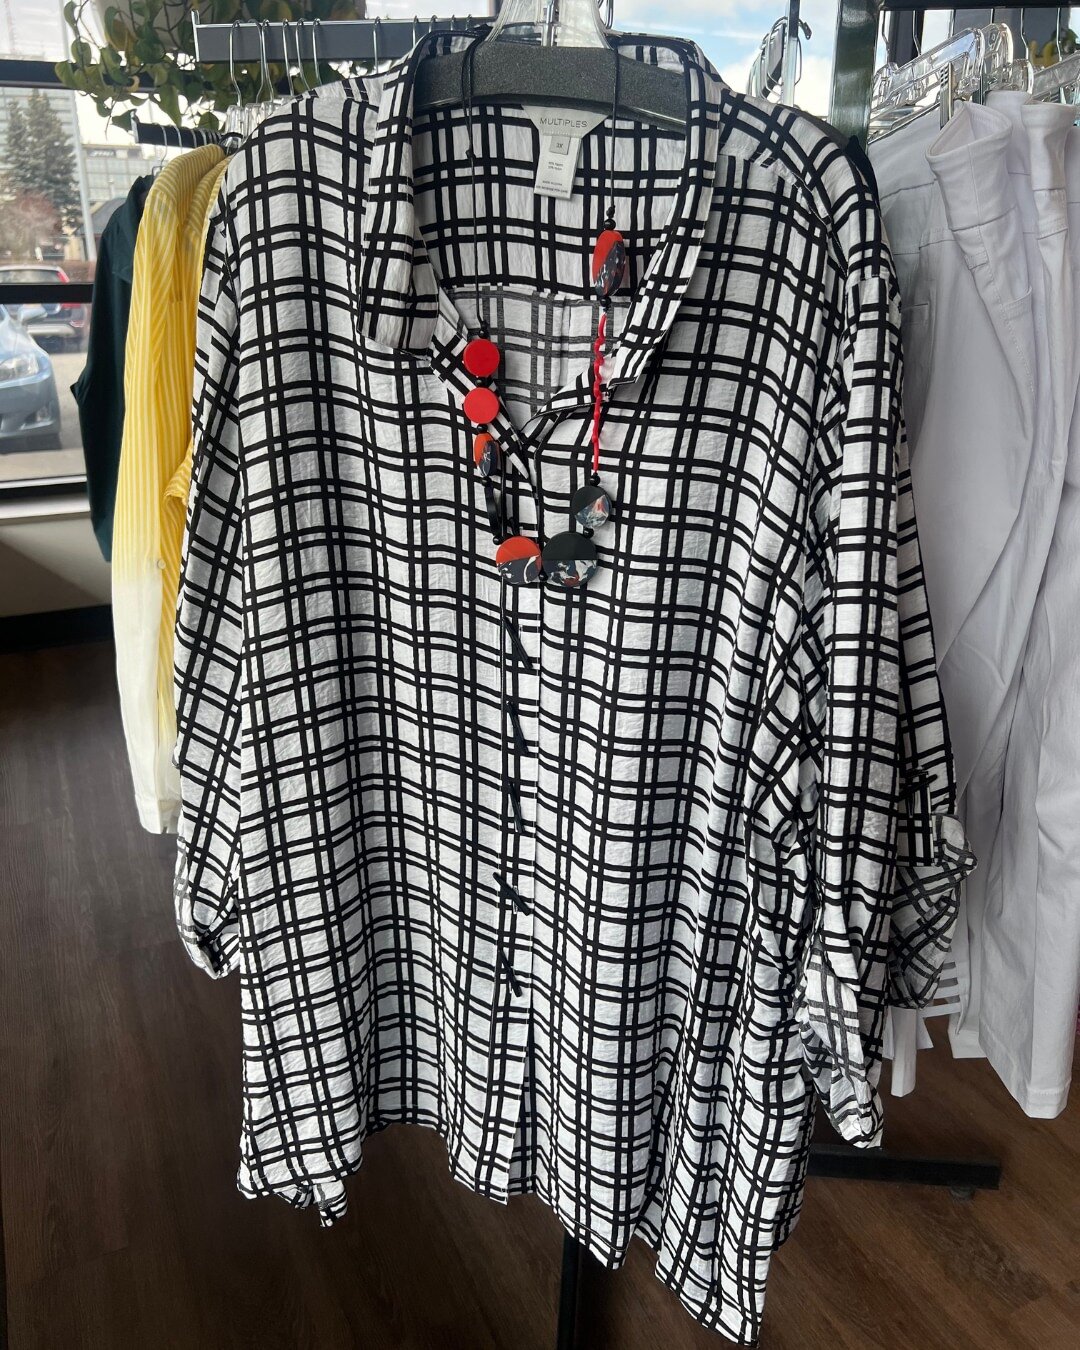 Black and white never goes out of style! 🤍 
Pair this classic button-up shirt with a statement accessory, like this bright red necklace, to take your look to the next level! ⚡️
.
#anchorageboutique #alaskaboutique #akshoplocal #portfolioak